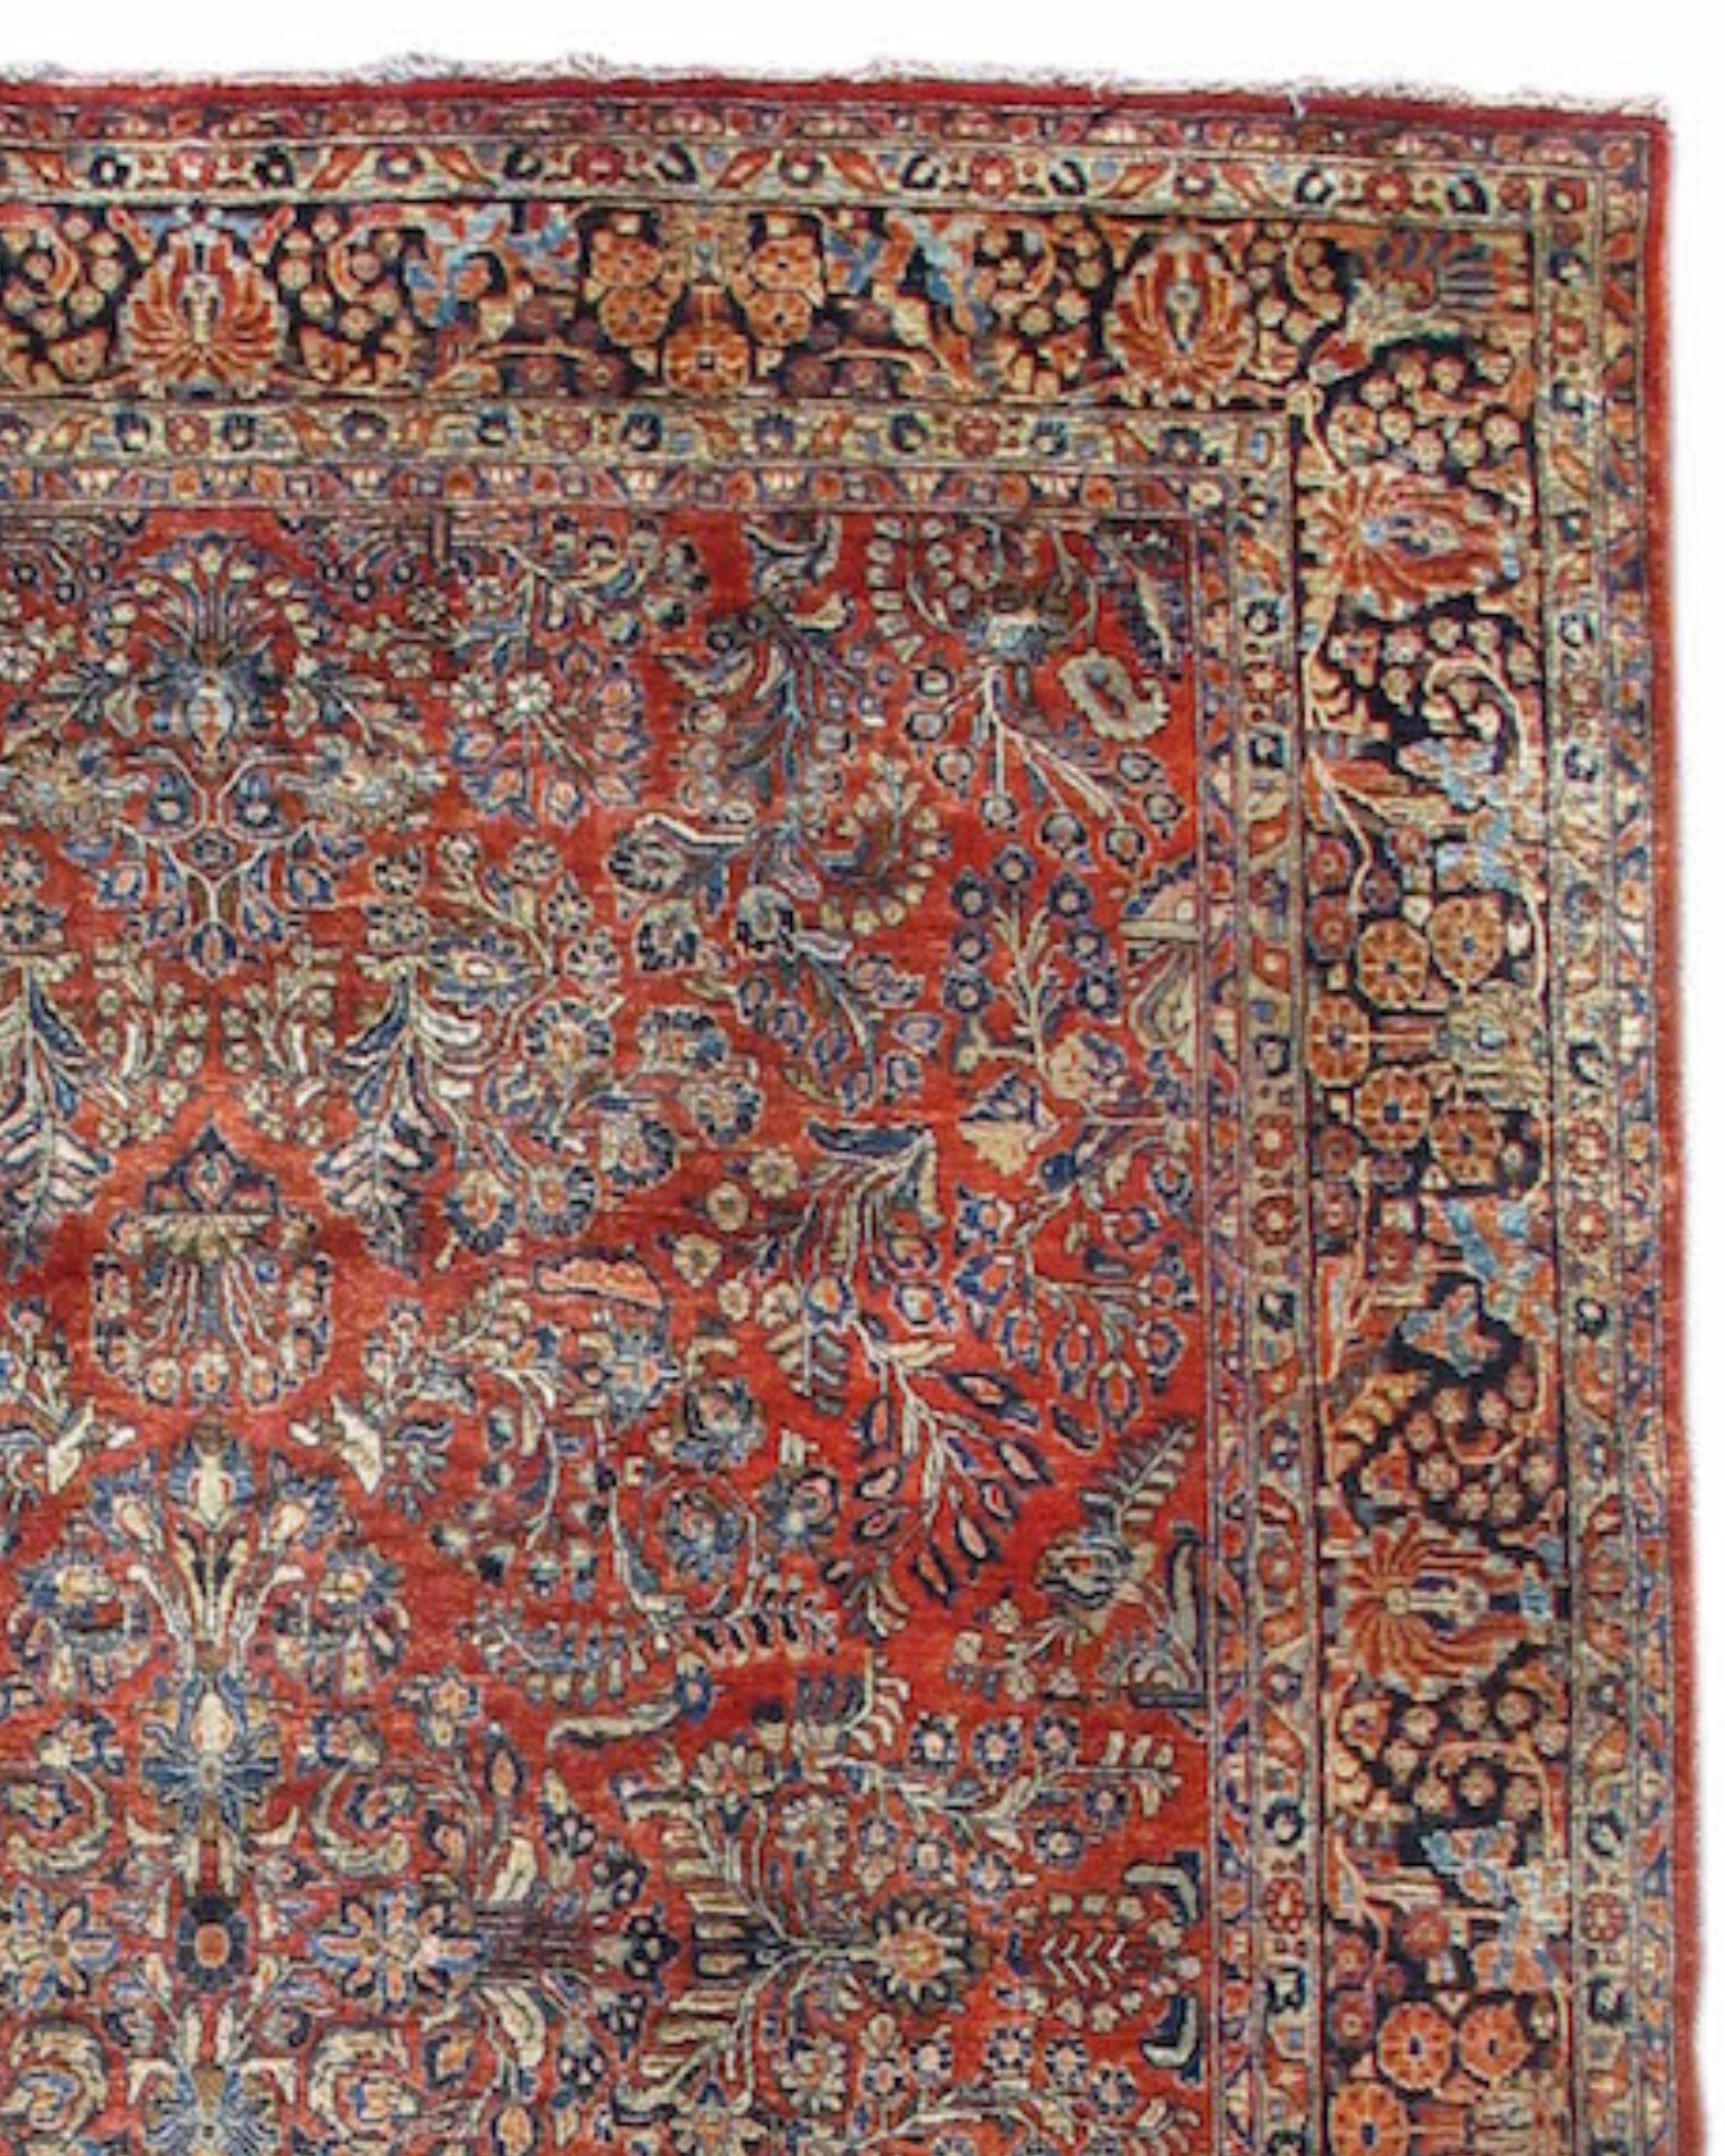 Wool Antique Persian Sarouk Rug, Early 20th Century For Sale